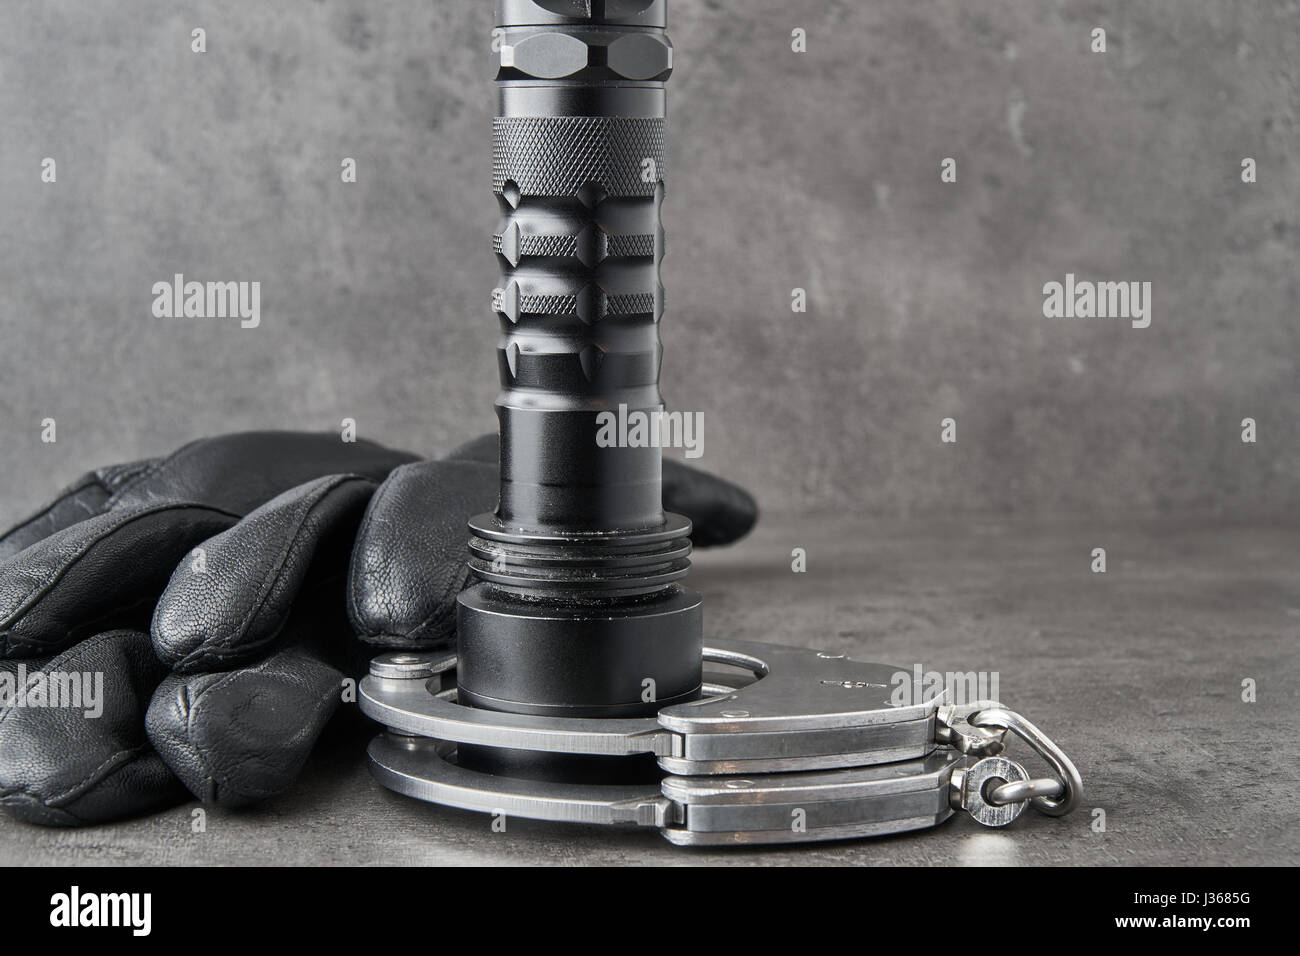 German police handcuffs, leather gloves and a torchlight on rough grey background with copy space. Stock Photo